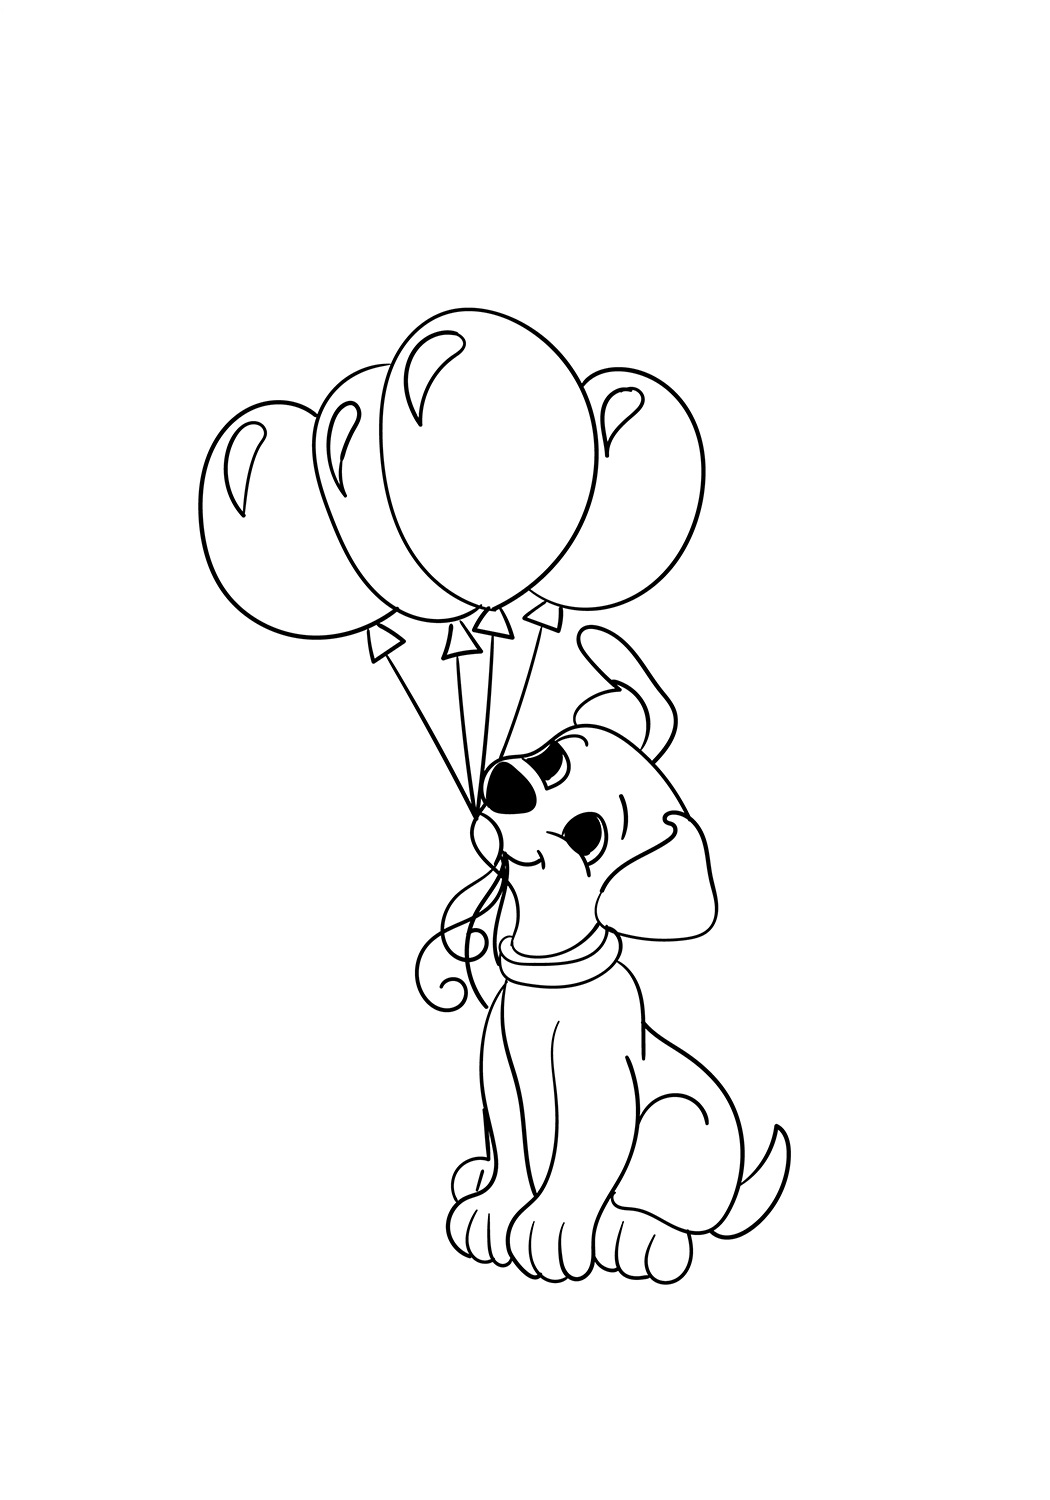 Puppy With Balloons